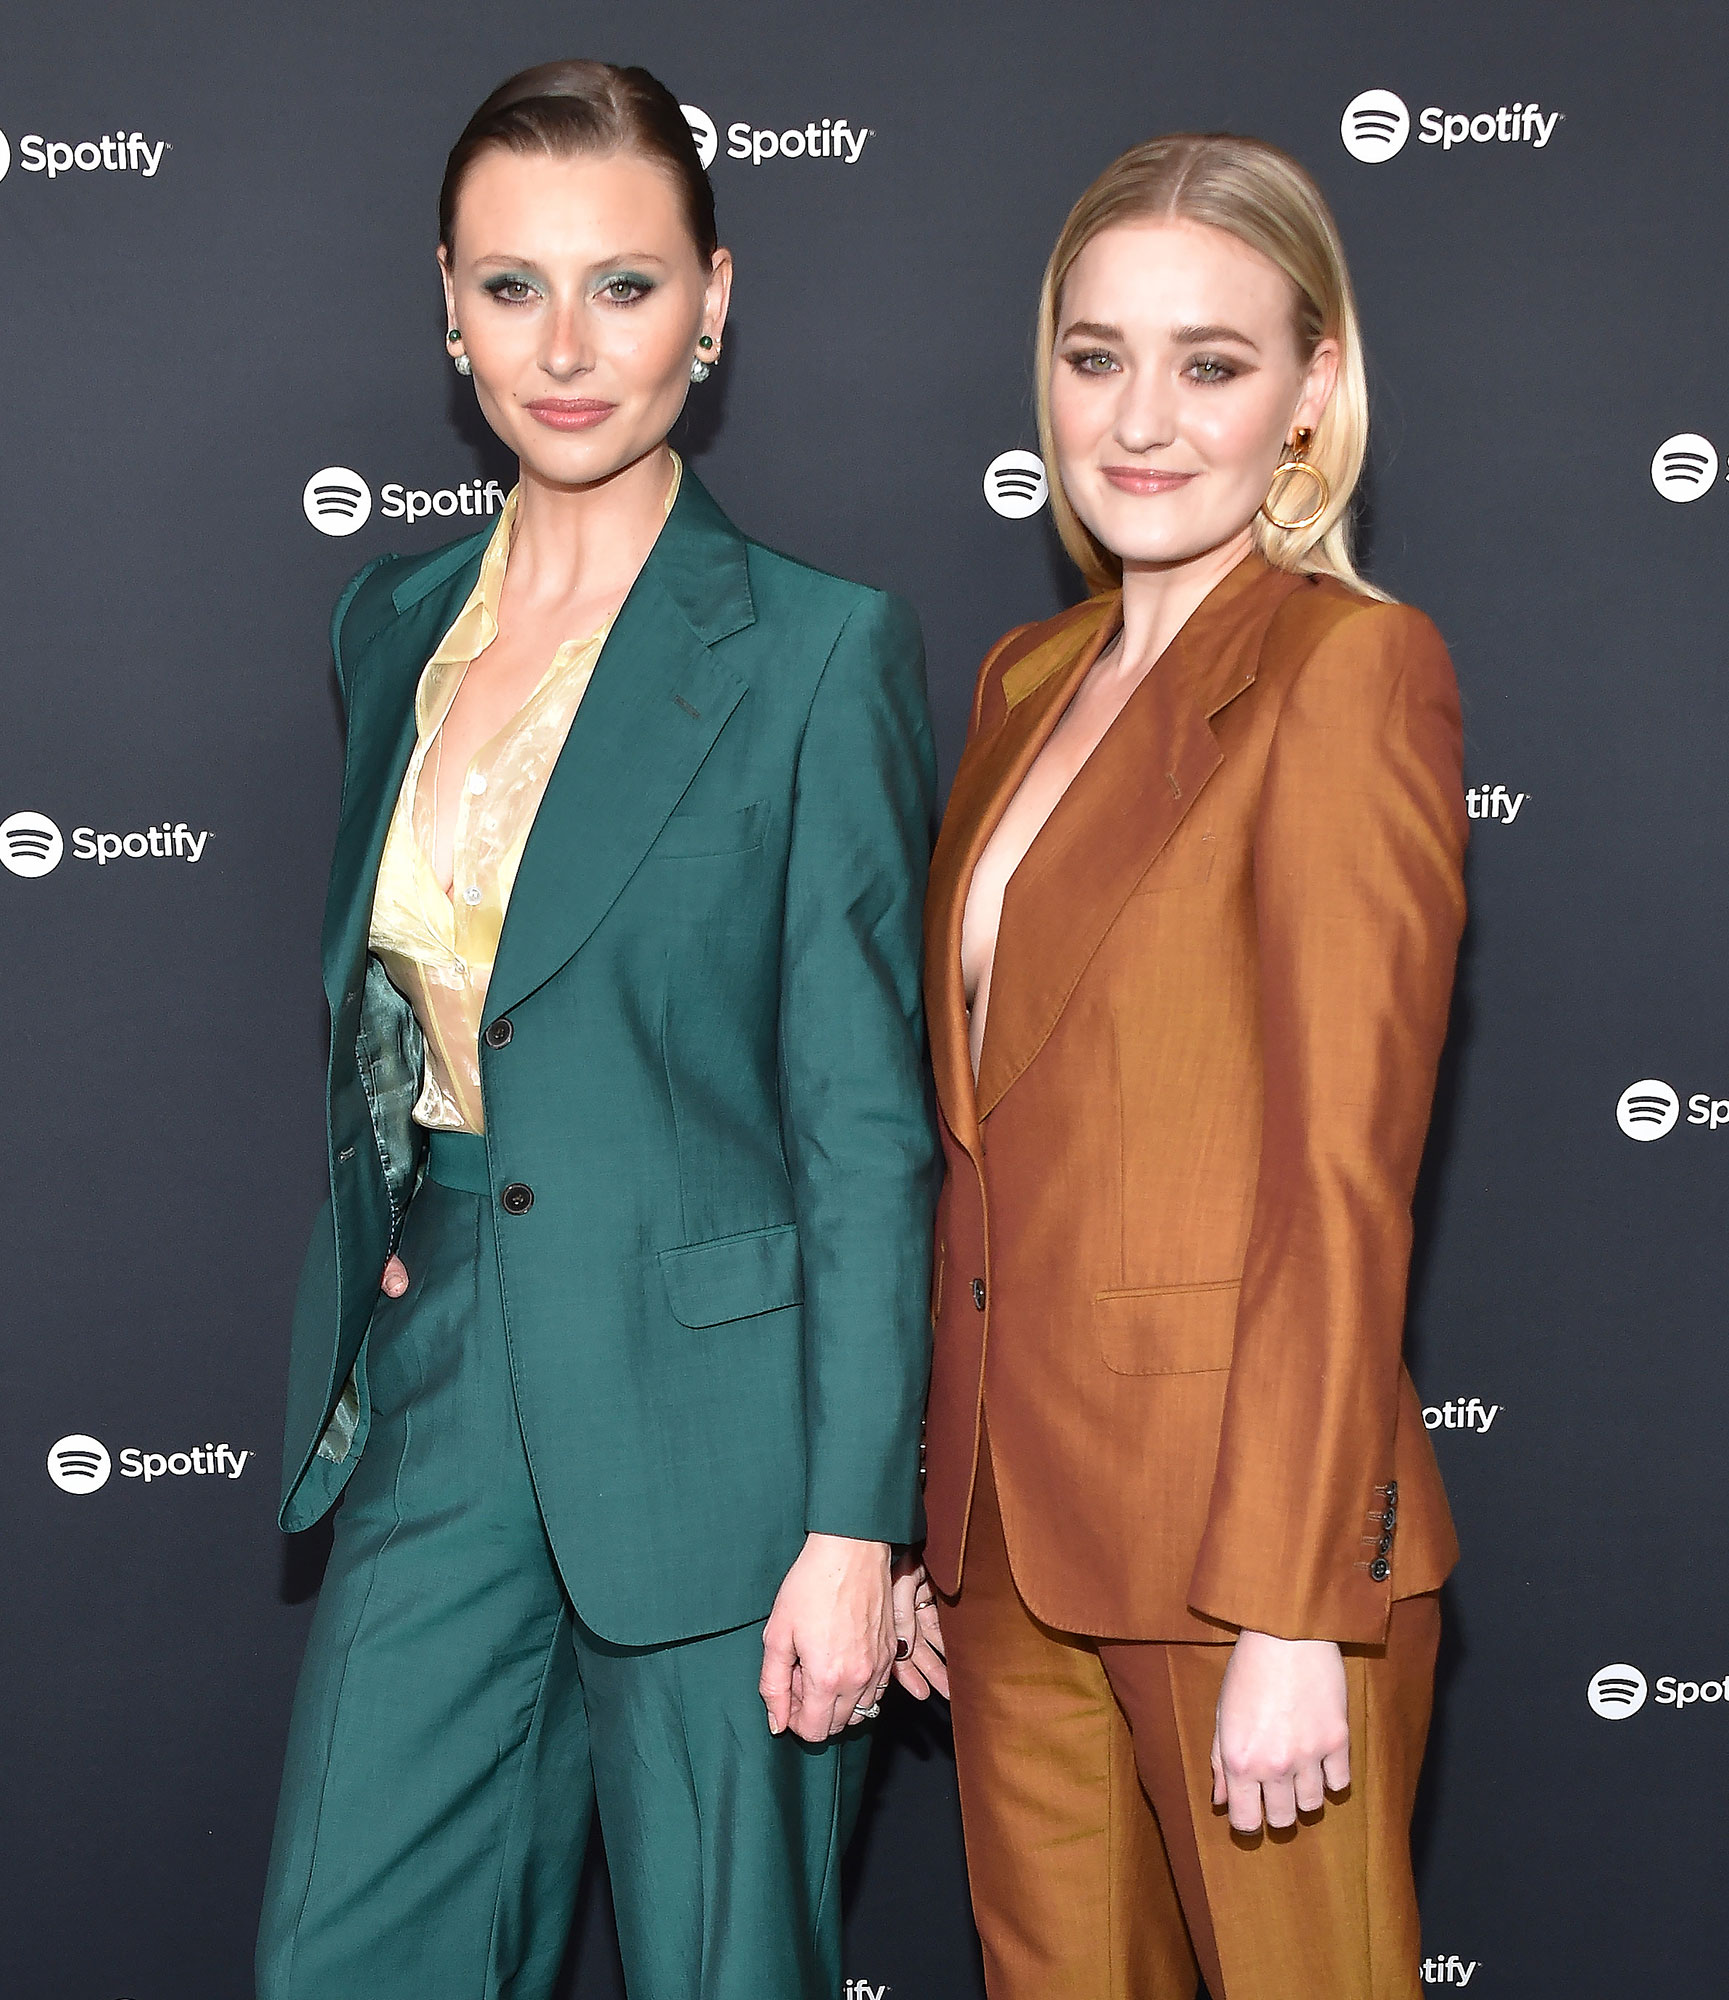 Aly, AJ Michalkas Dad Hospitalized for COVID-19 and Pneumonia image